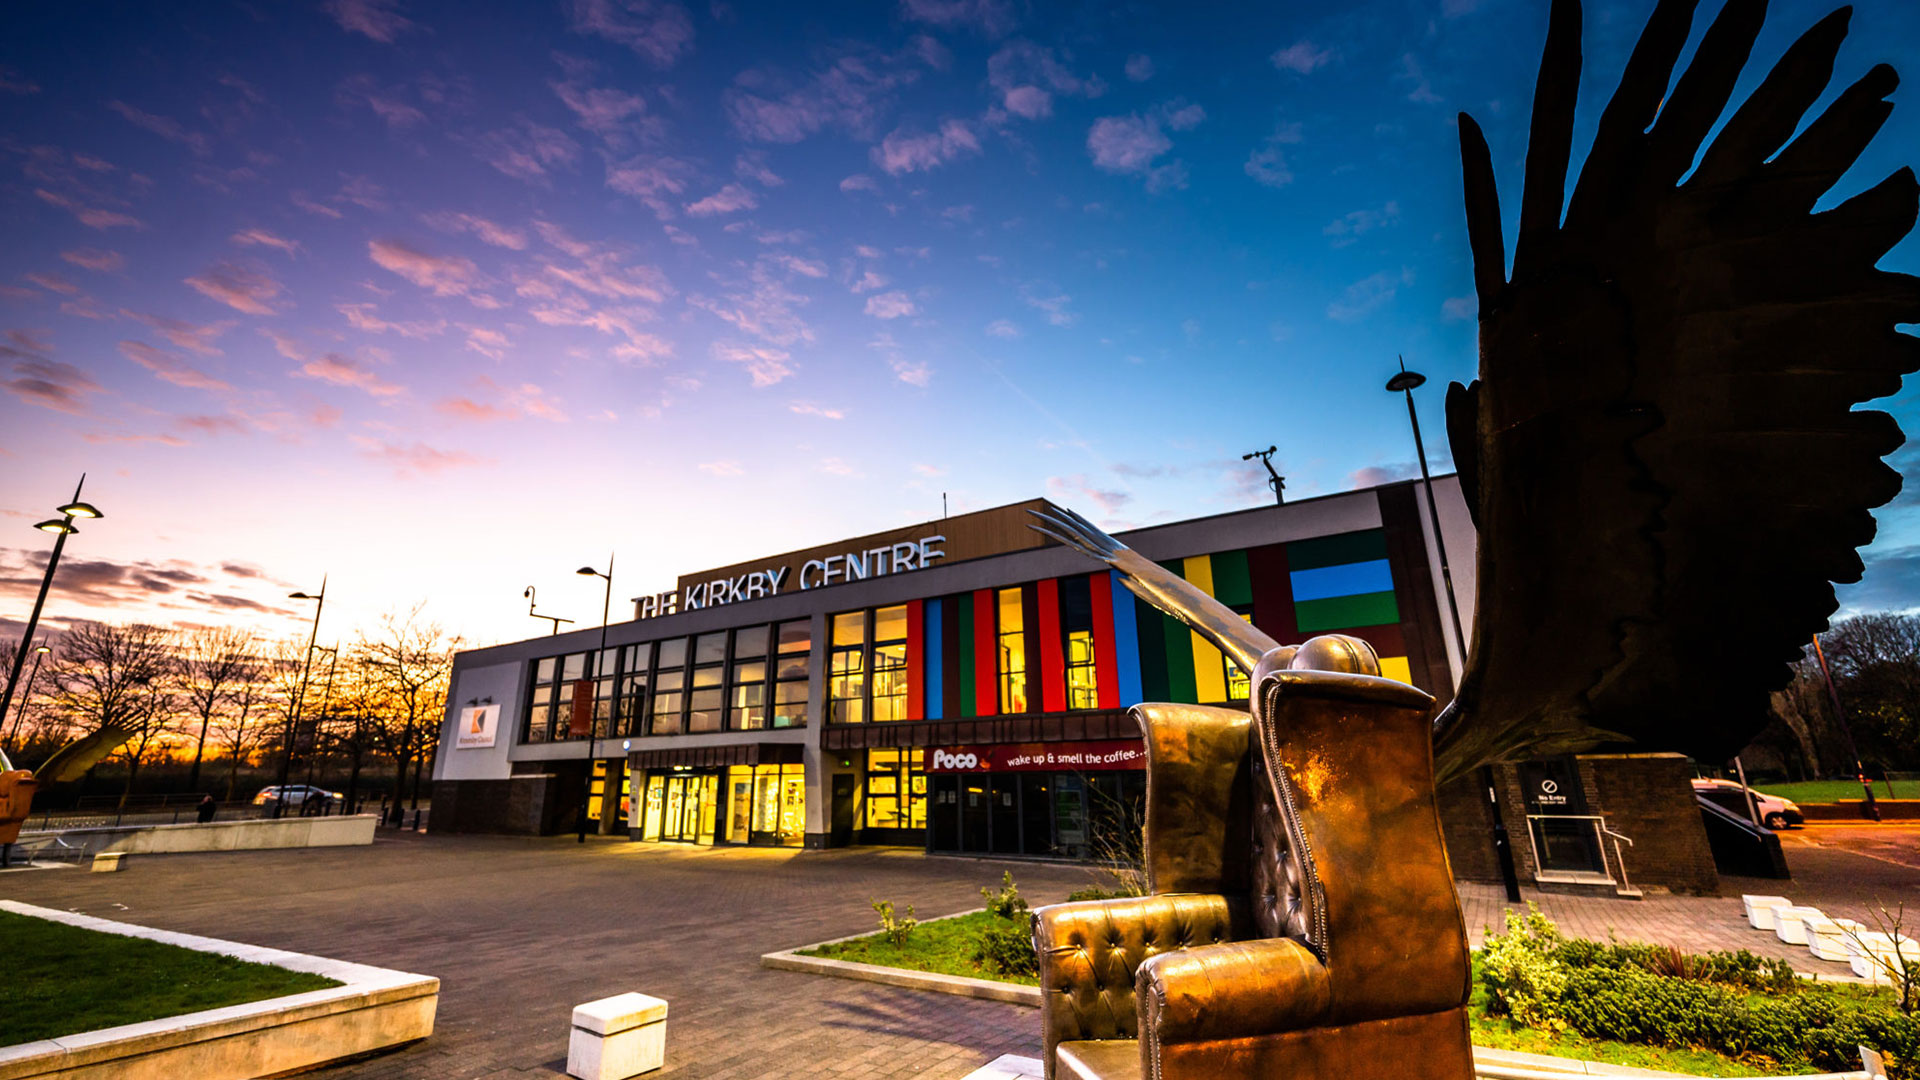 The Kirkby Centre lit up